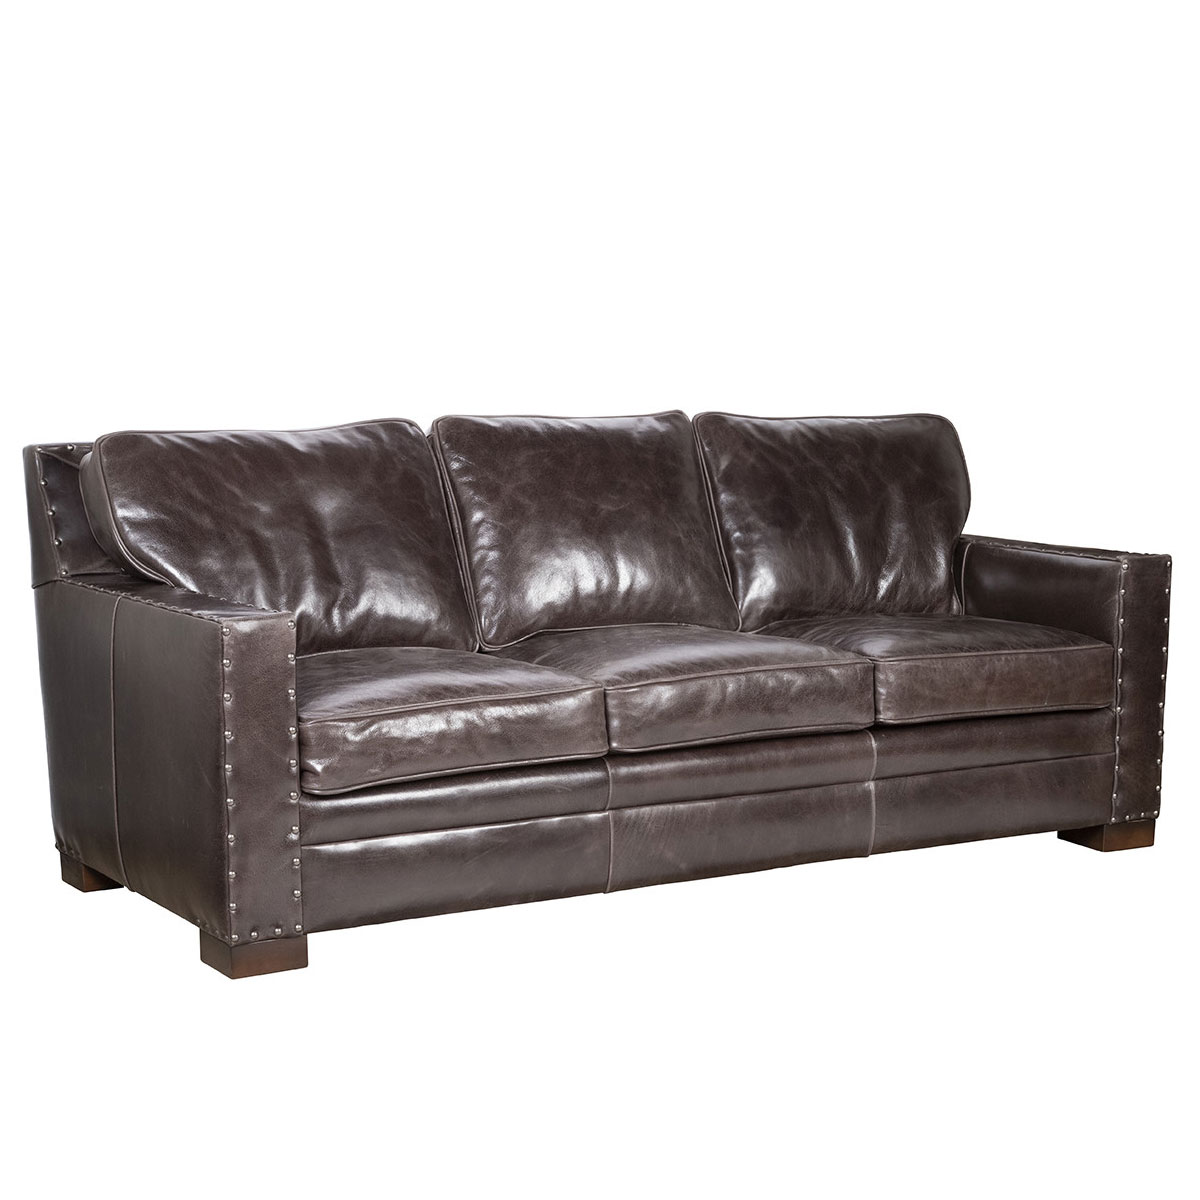 452 Telluride Sofa by CC Leather